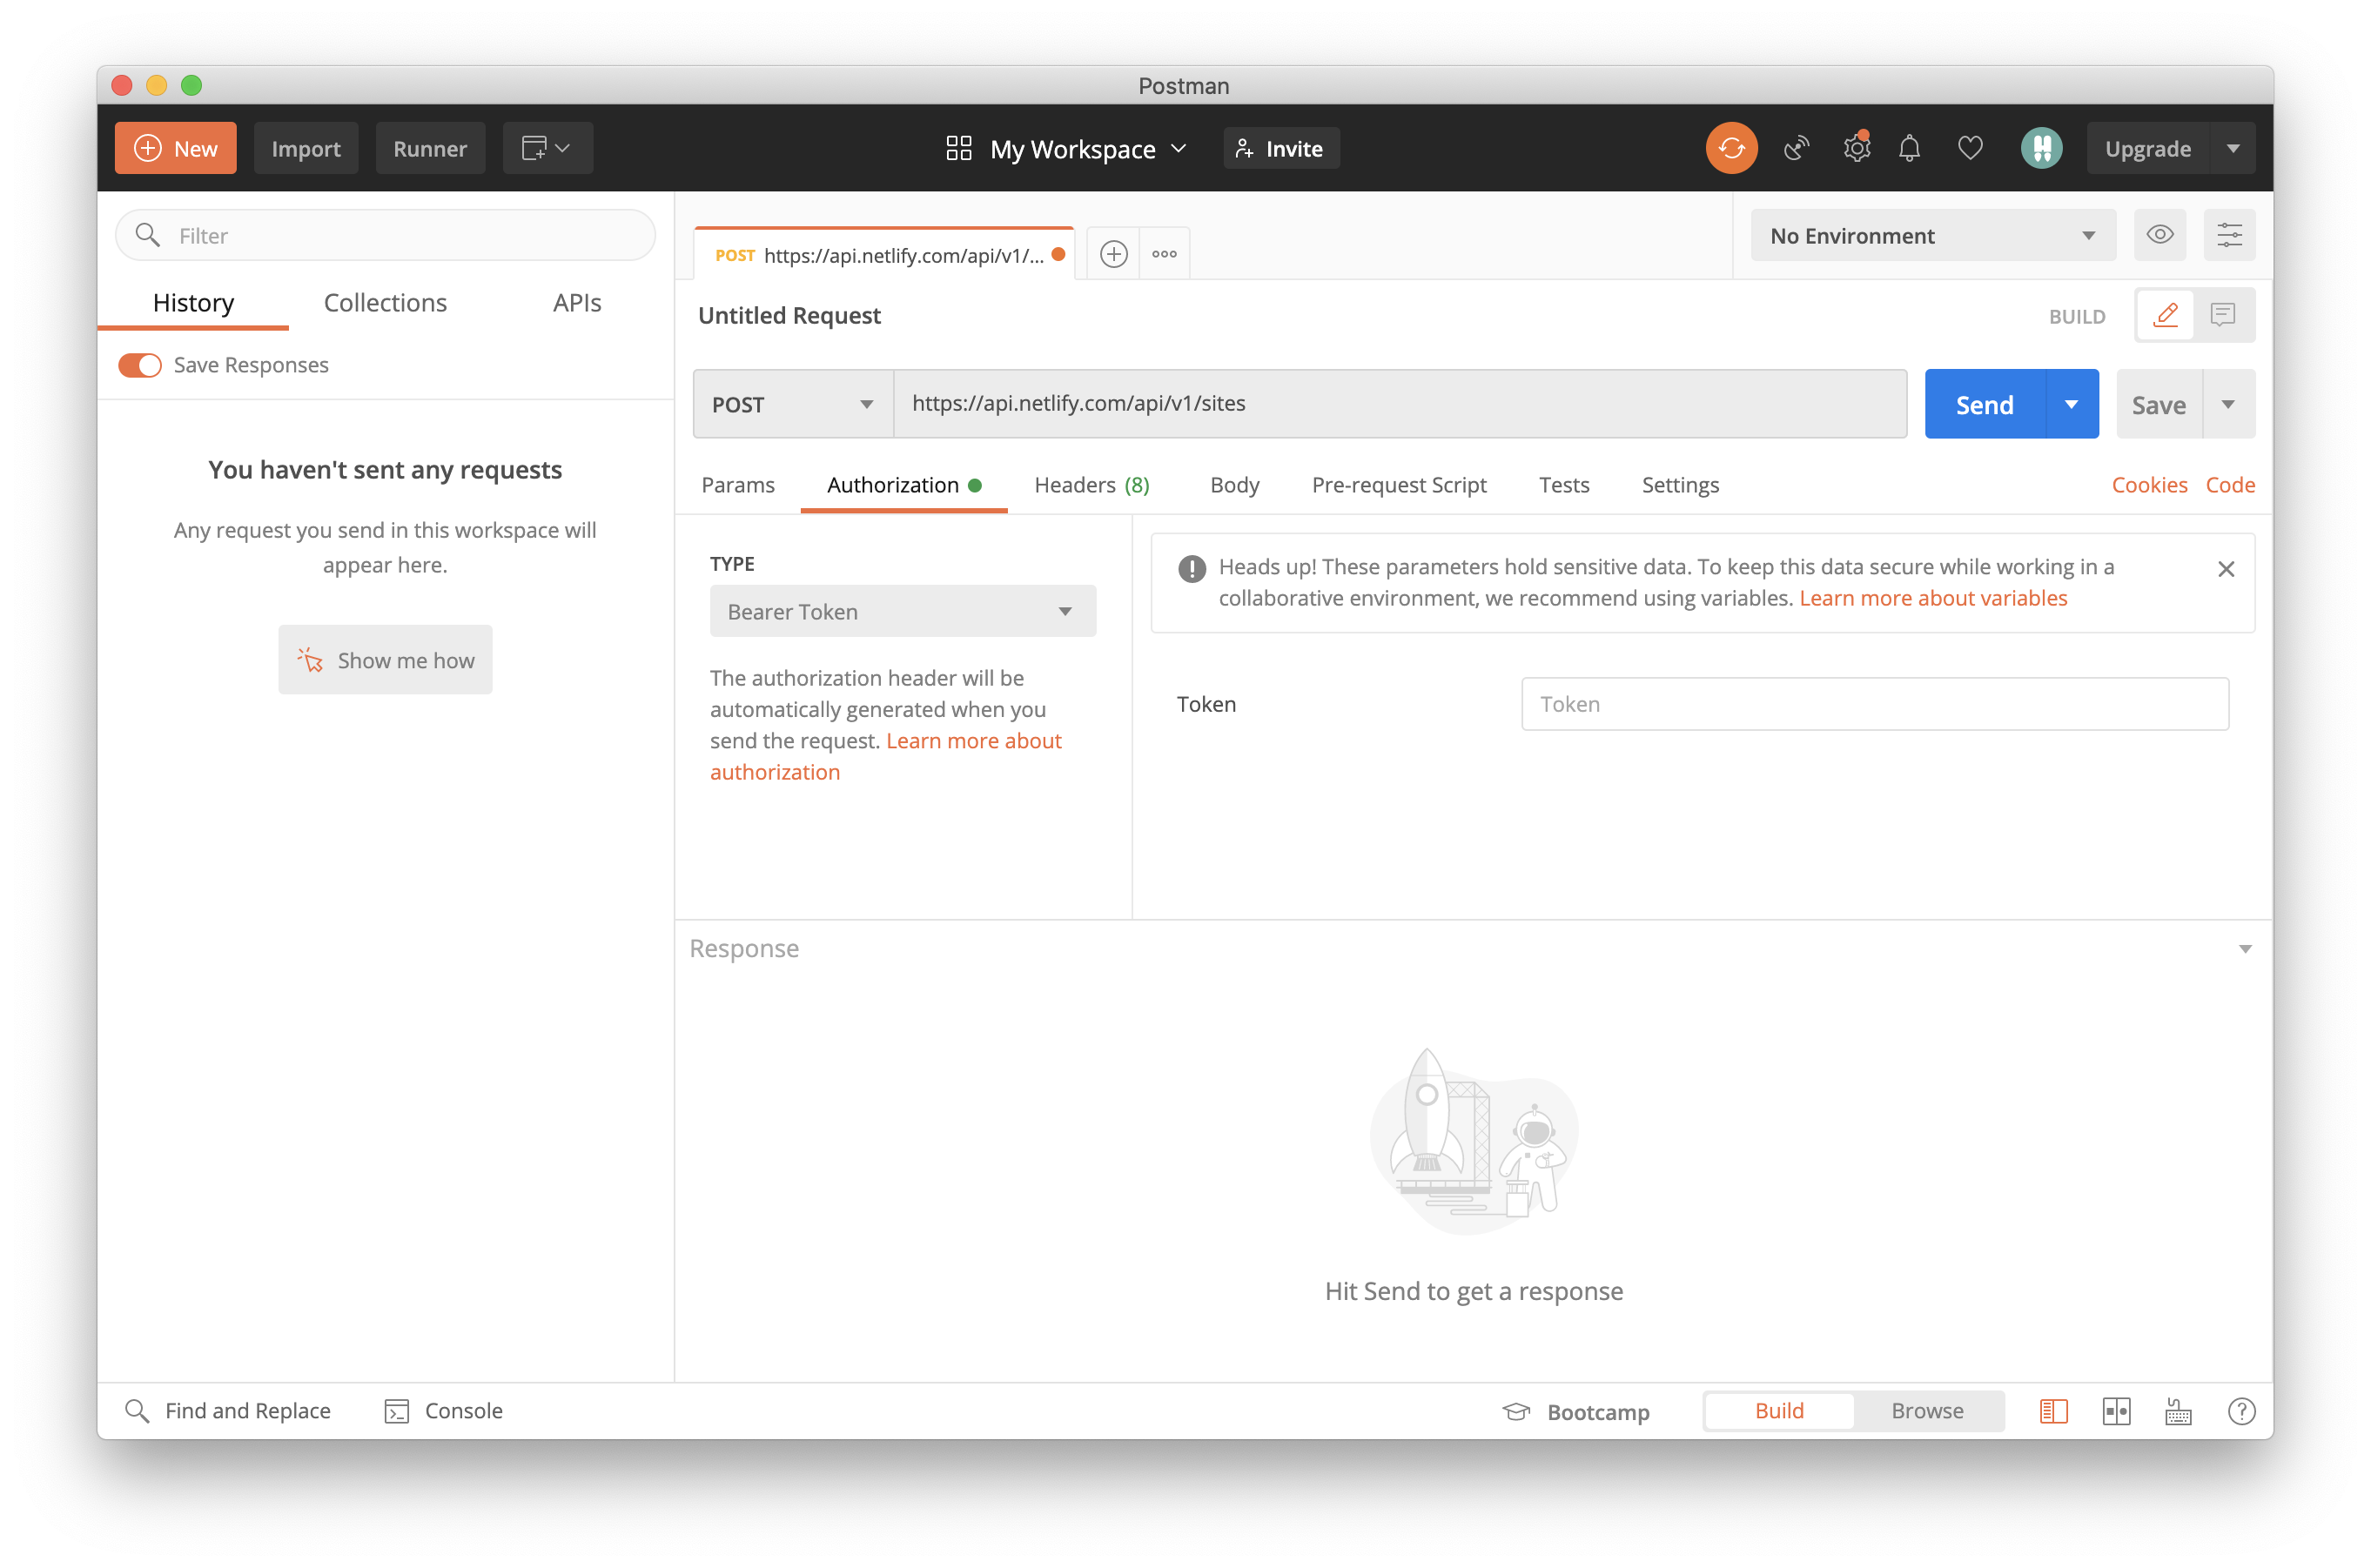 Screenshot of a new request in Postman, with "Authorization" tab highlighted and "Bearer token" selected from the type menu